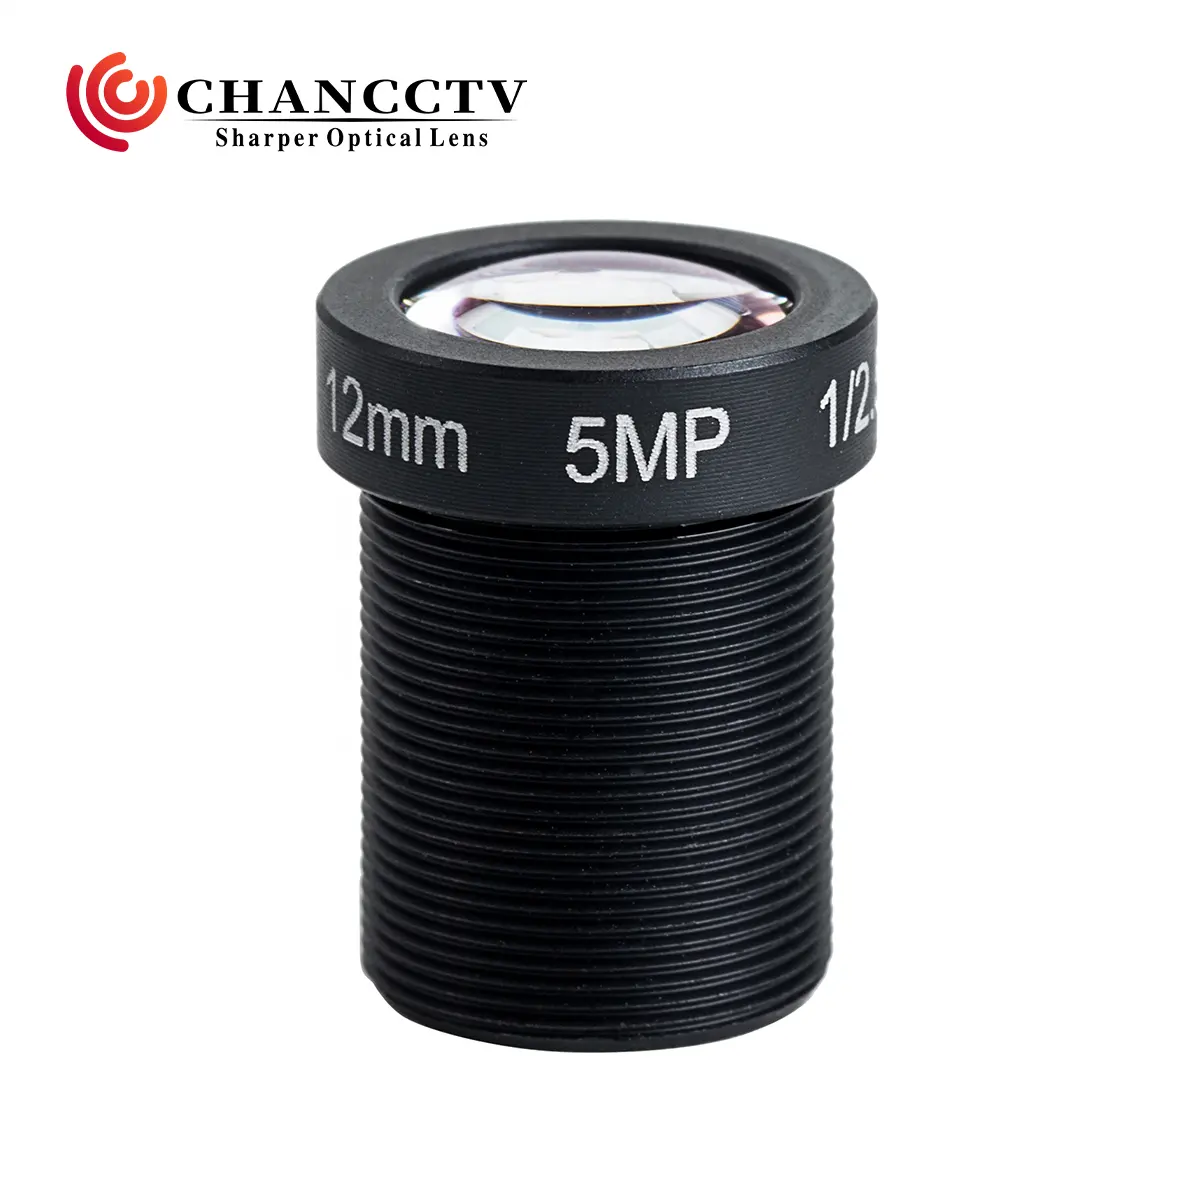 5MP 12mm Board Lens with M12xP0.5 Mount F2.0 Aperture 1/2.5" CCTV Lens